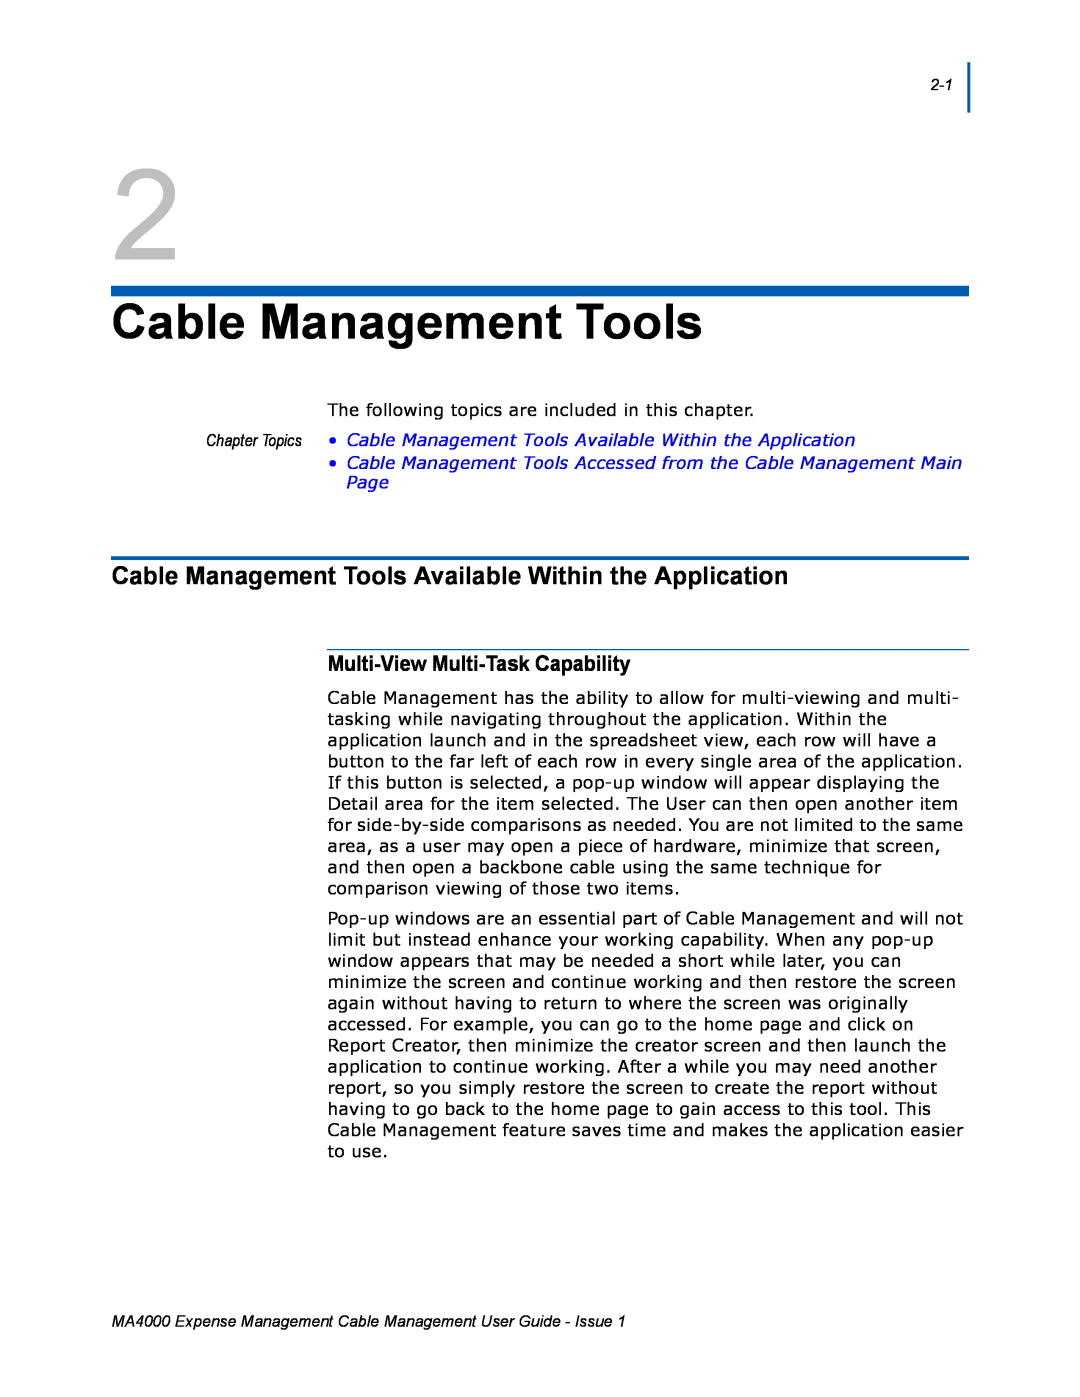 NEC MA4000 manual Cable Management Tools, Multi-View Multi-TaskCapability 